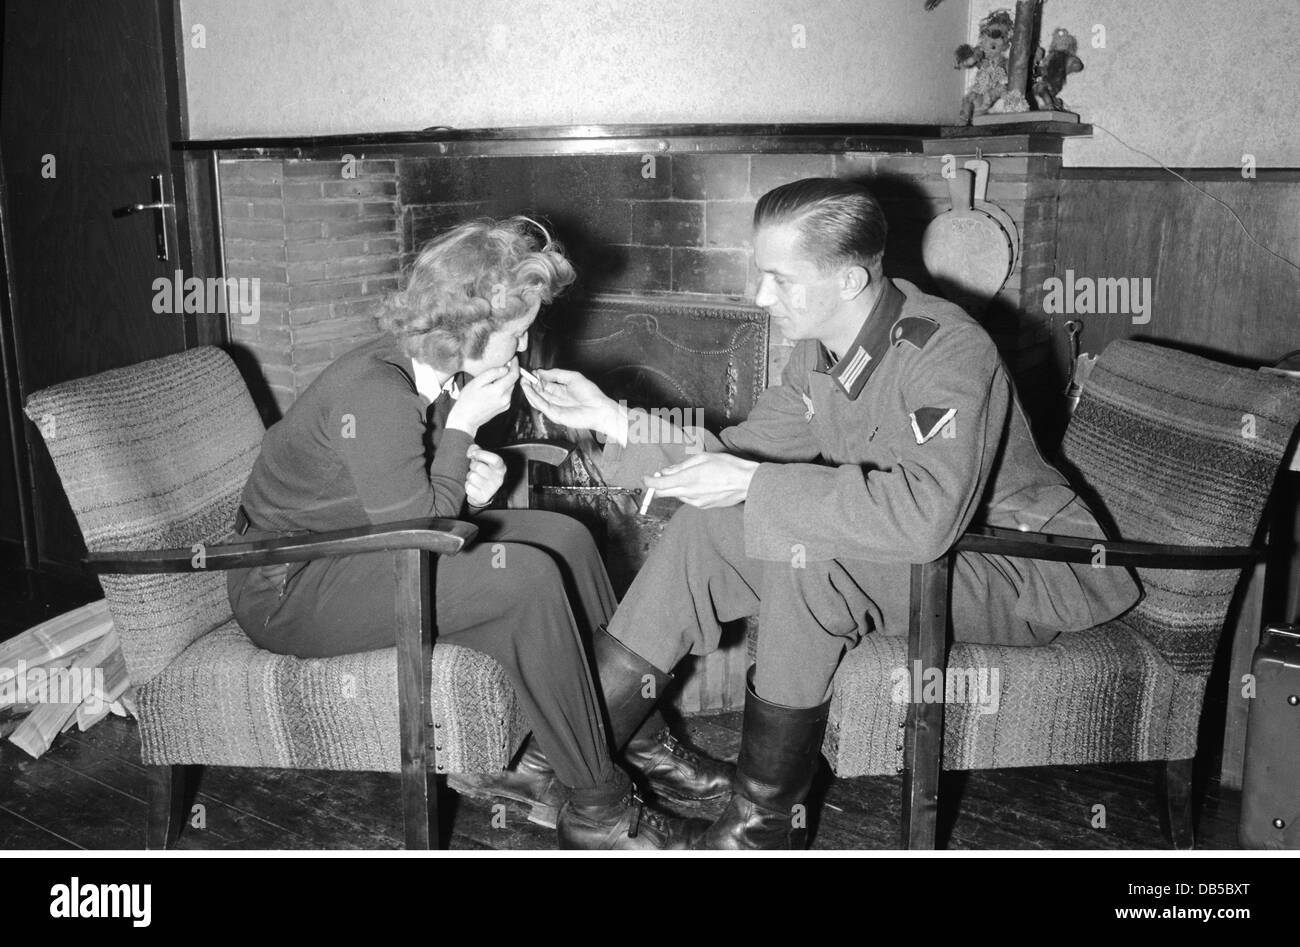 events, Second World War / WWII, Germany, Wehrmacht soldier with a woman in front of a fireplace, circa 1941, Additional-Rights-Clearences-Not Available Stock Photo